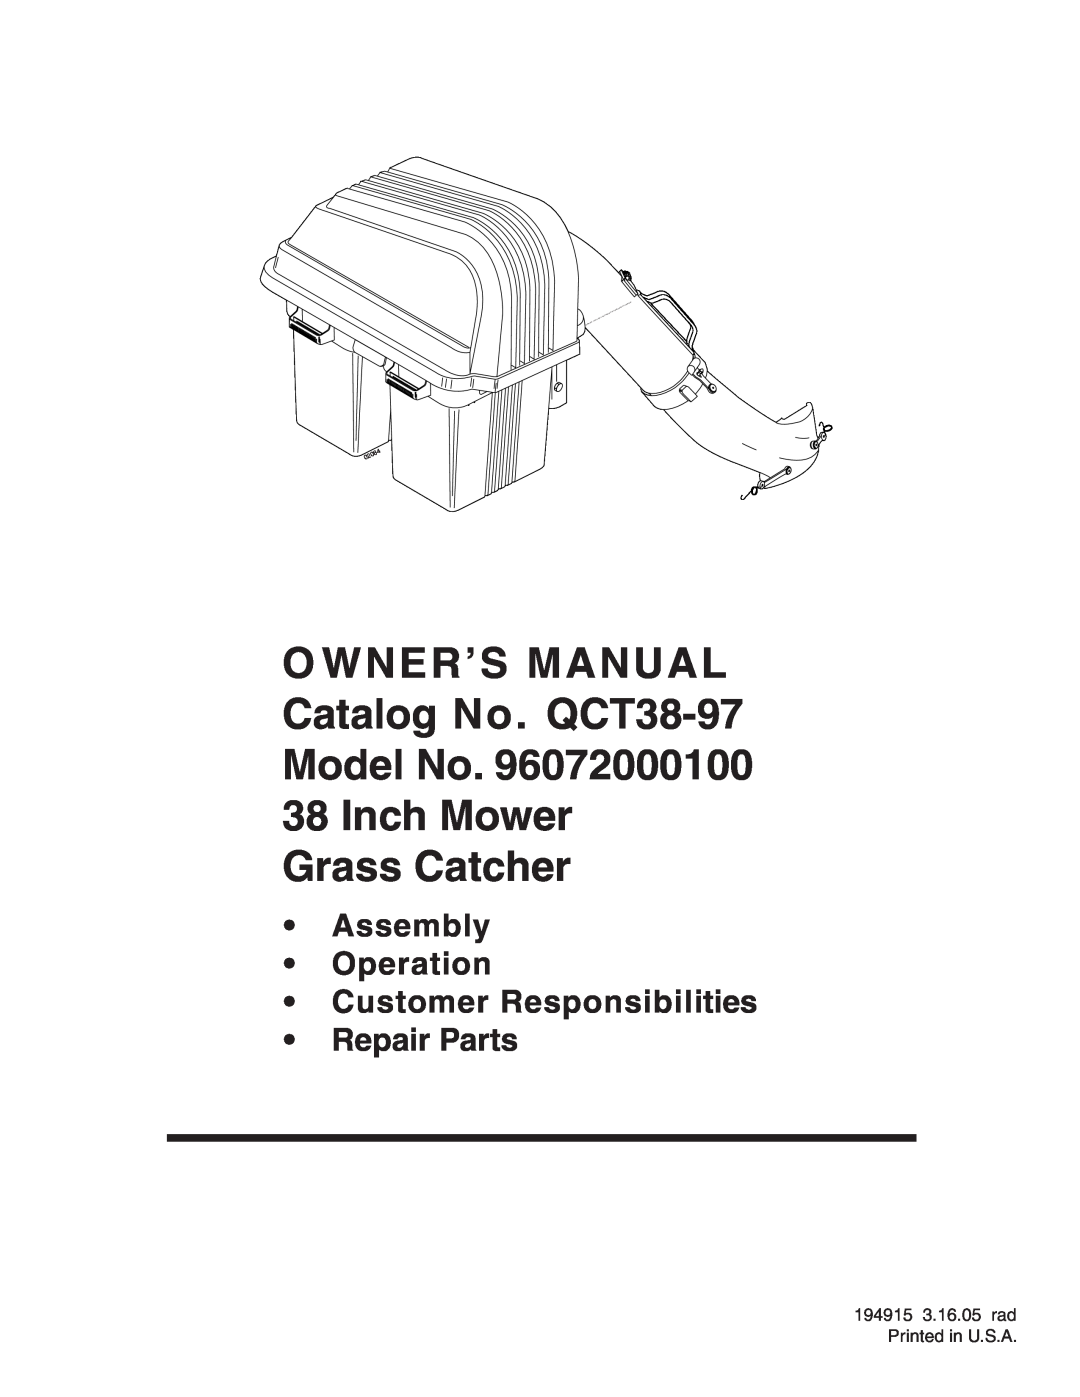 Poulan 96072000100 owner manual O WNER’S MANUAL Catalog No. QCT38-97 Model No, Inch Mower Grass Catcher, Repair Parts 